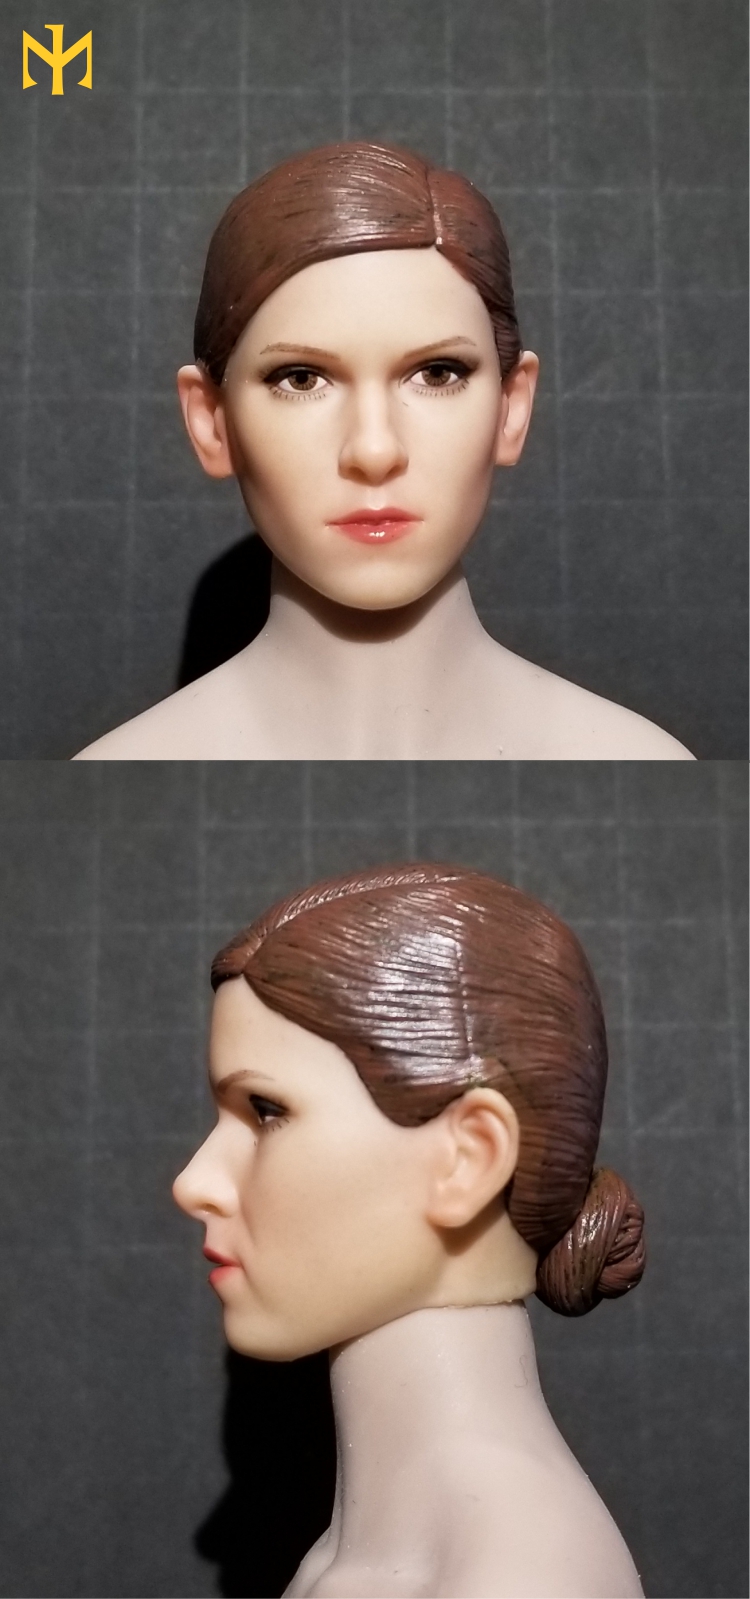 Head Sculpt General Catalog (contribute, but check out the rules) - Page 5 Fsmild10